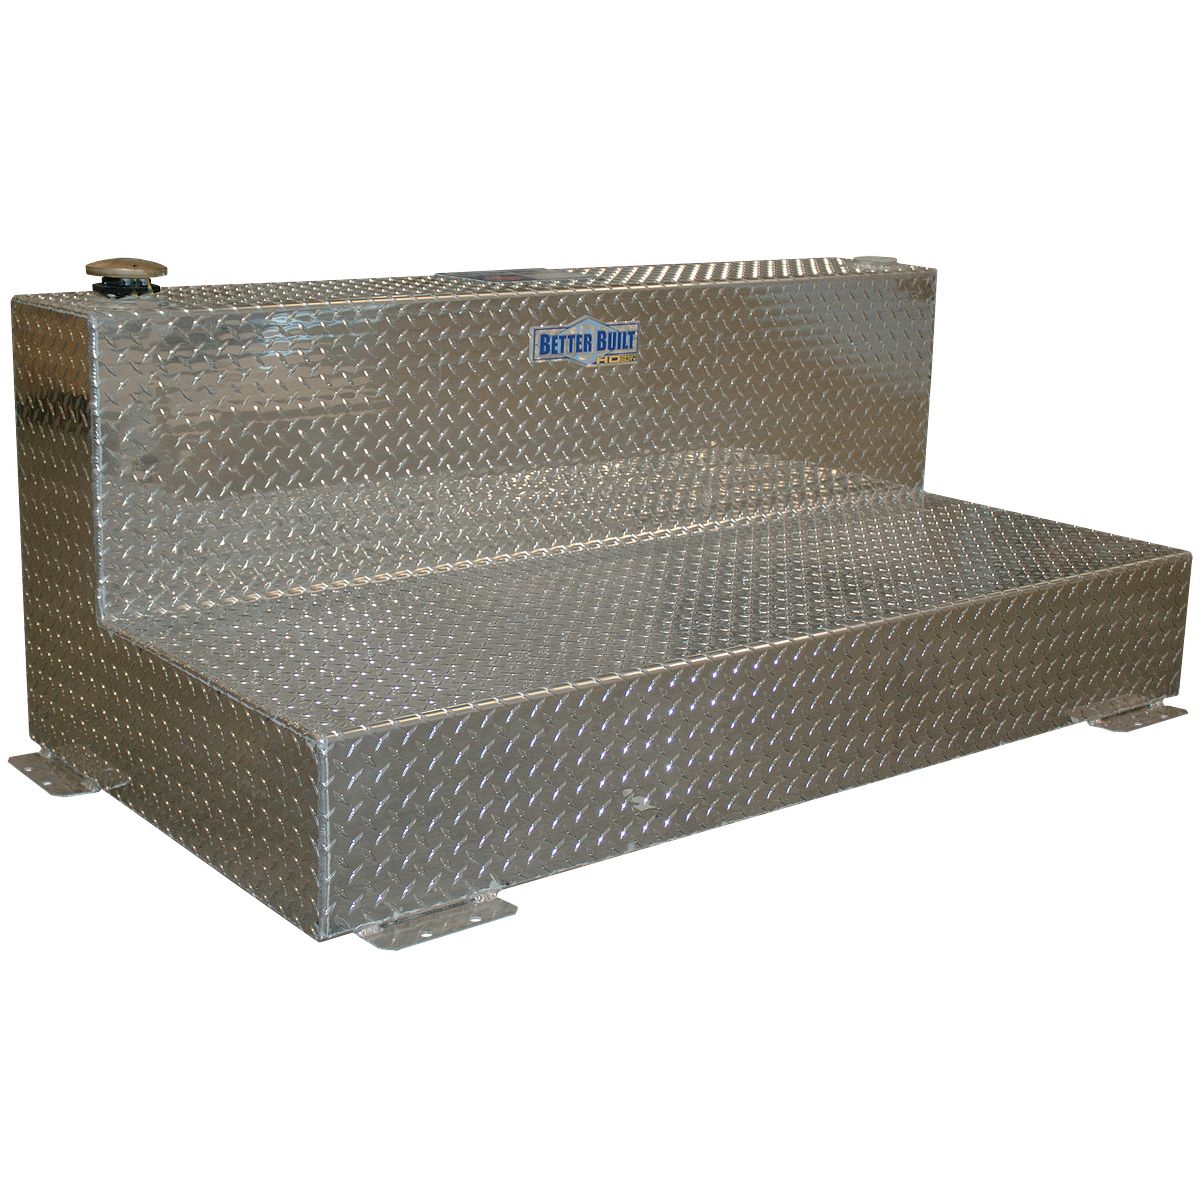 Aluminum 34 gallon transfer Tank with drop step for tank LOW PROFILE